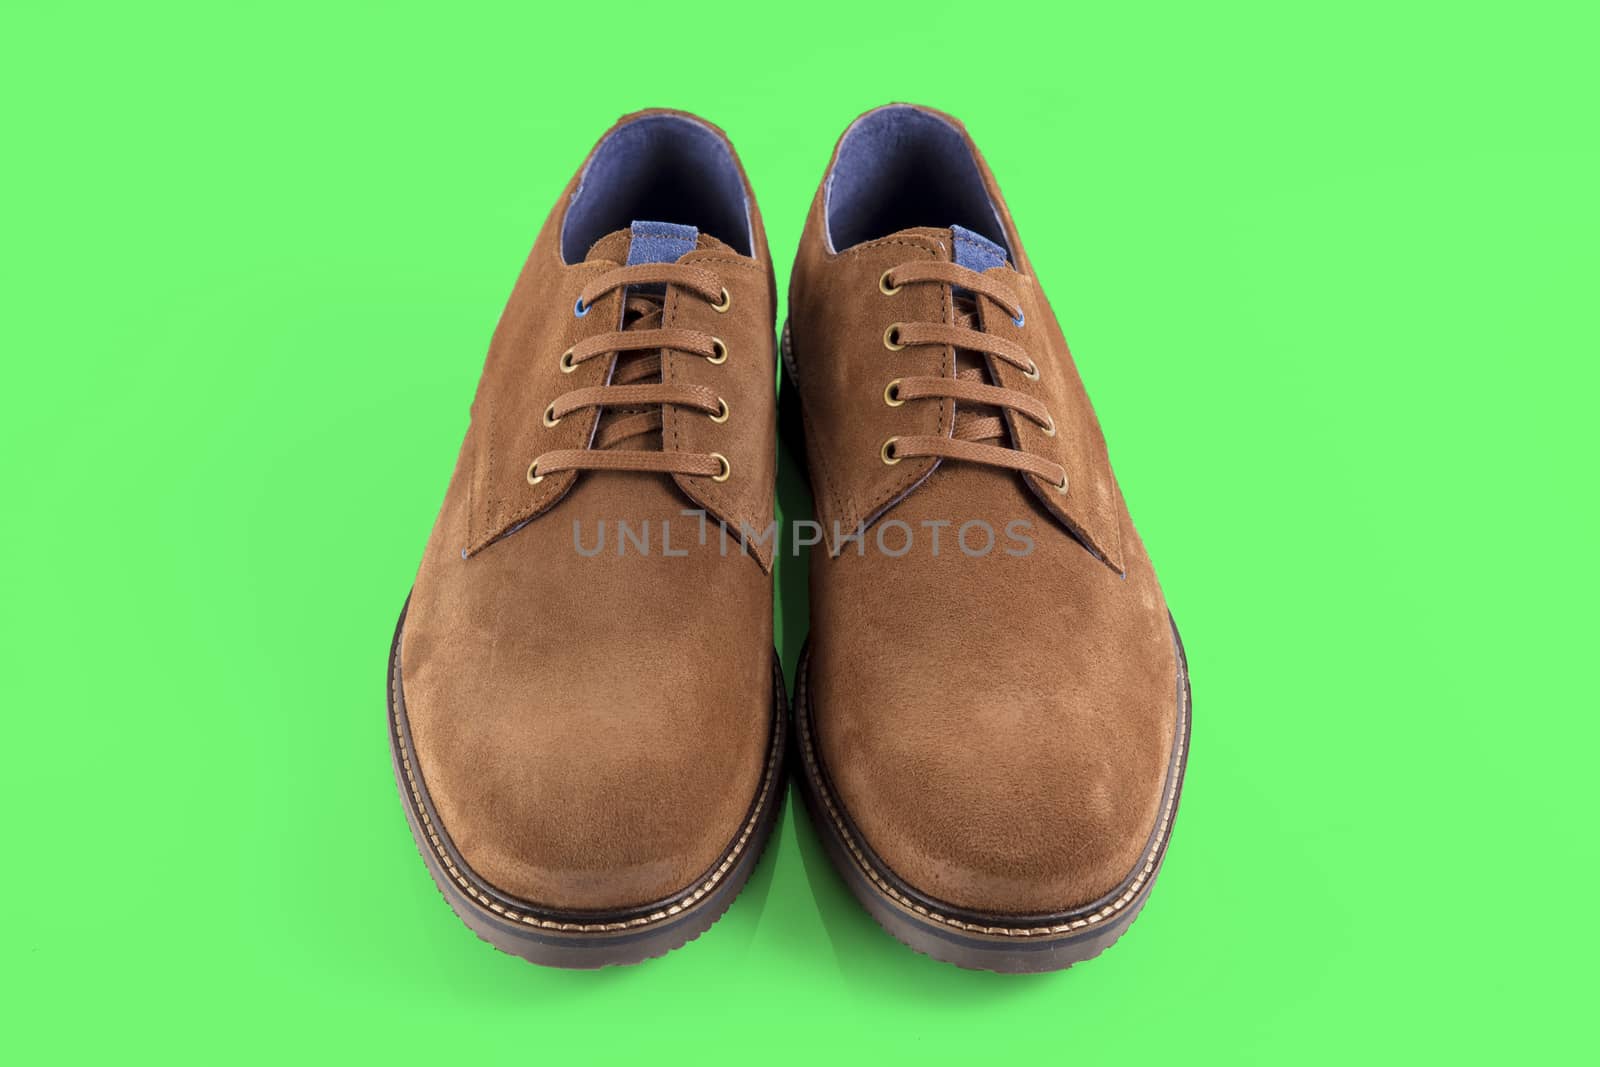 Pair of brown shoes on green background, isolated product. by GeorgeVieiraSilva